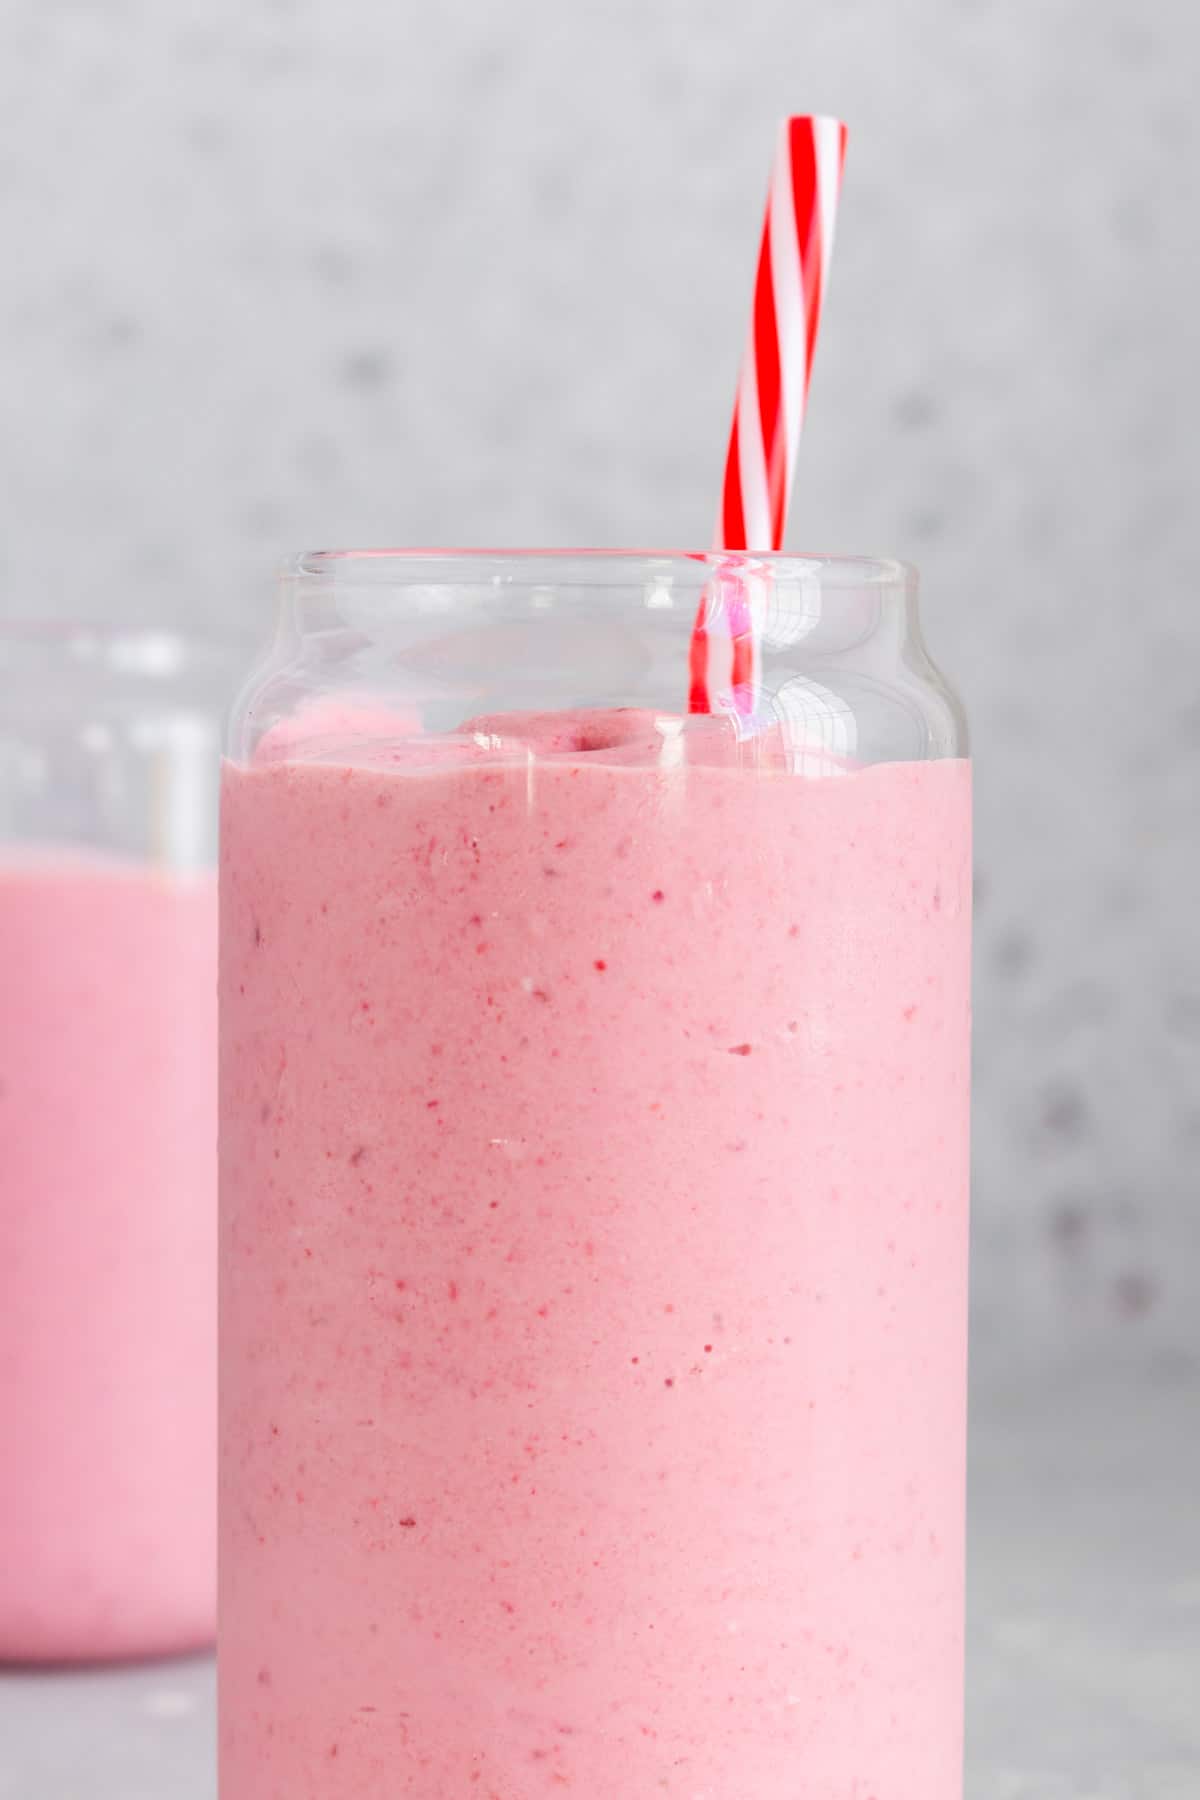 Profile view of a glass of frozen fruit smoothie with a straw with another glass in the background.